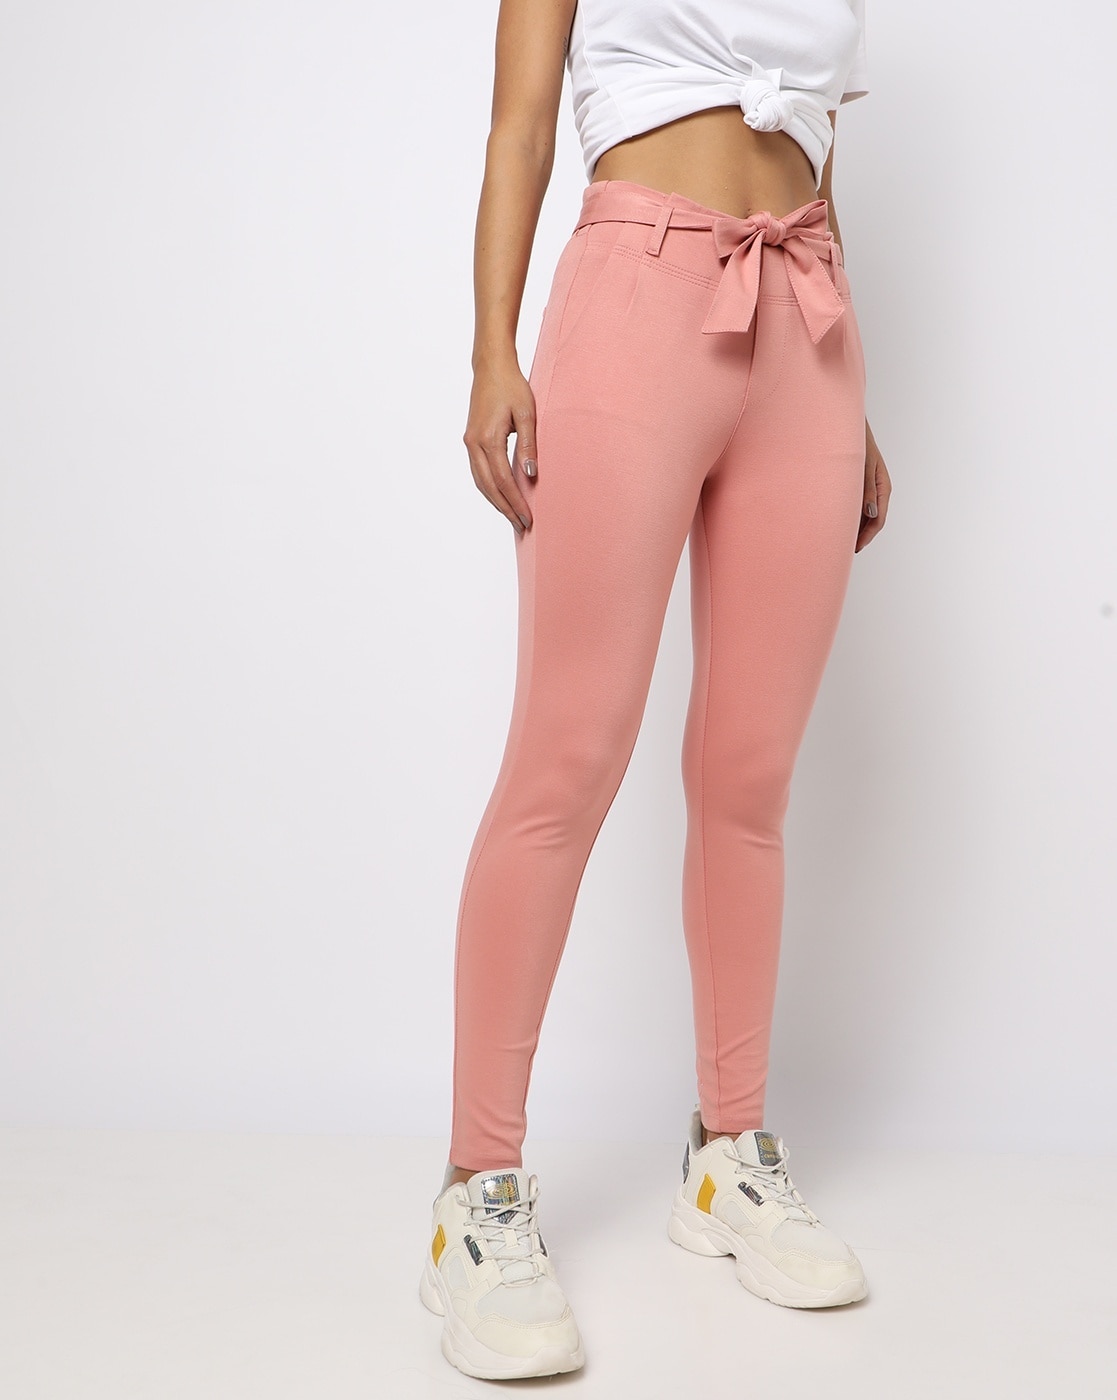 Hyperstretch Skinny Jeans Pink, 45% OFF